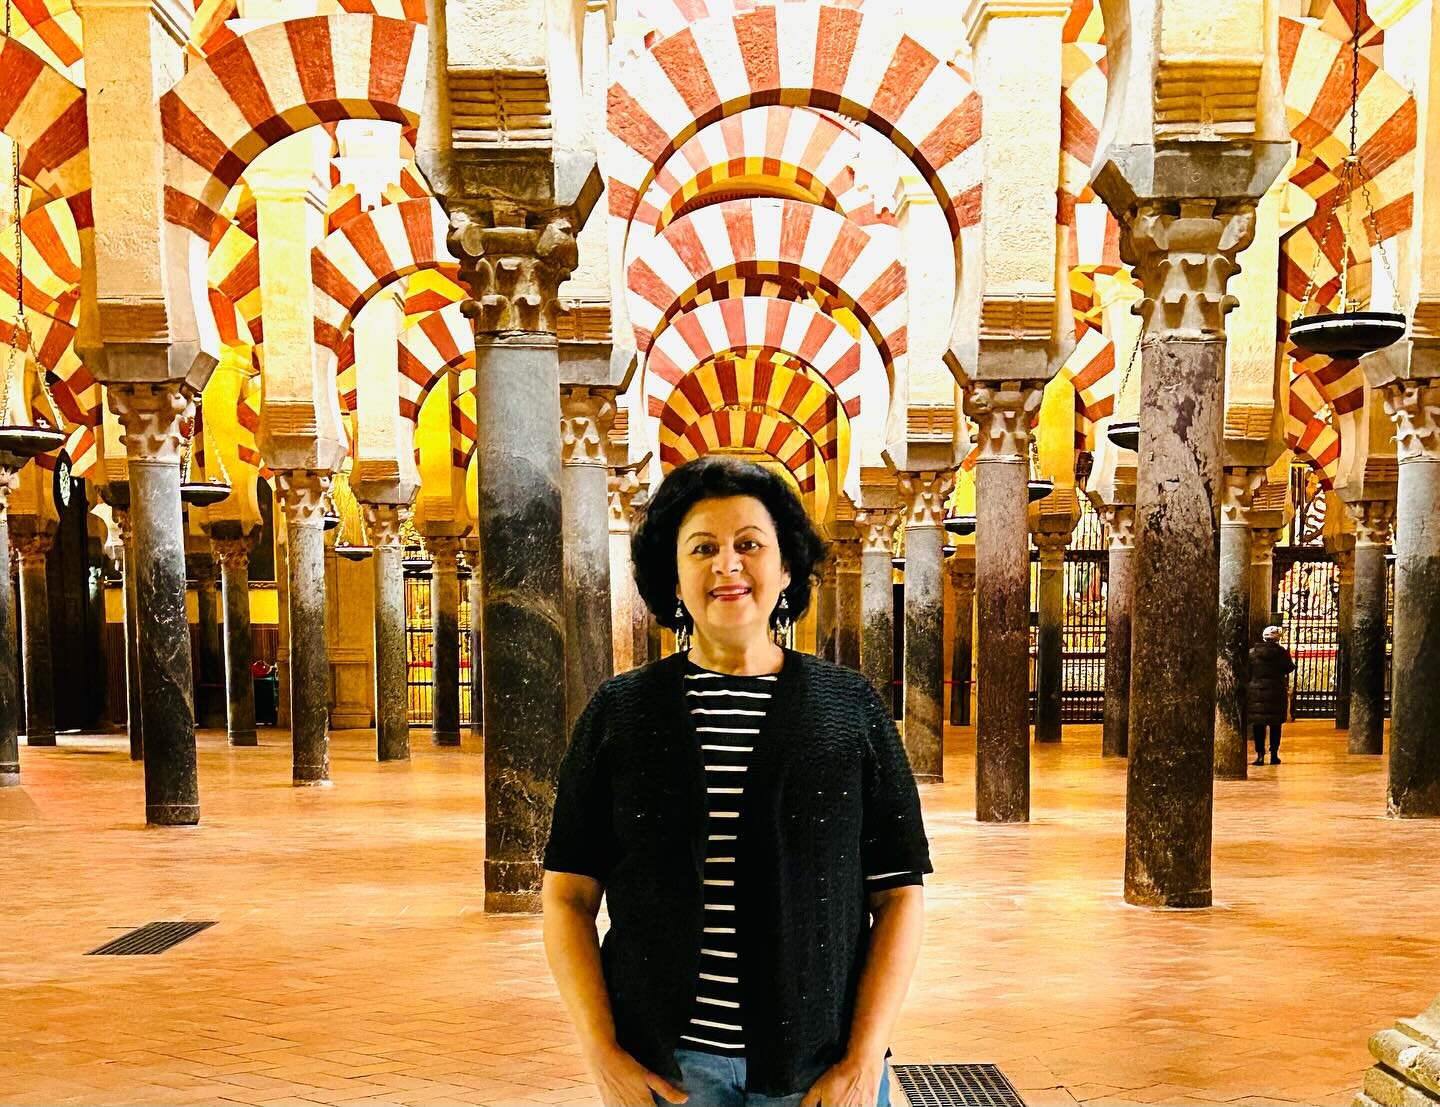 Scenes from charming Cordoba and its spectacular Mezquita which started out as a monumental mosque in the 8th century and was later converted to a cathedral in the 13th century, and is still stunningly impressive!